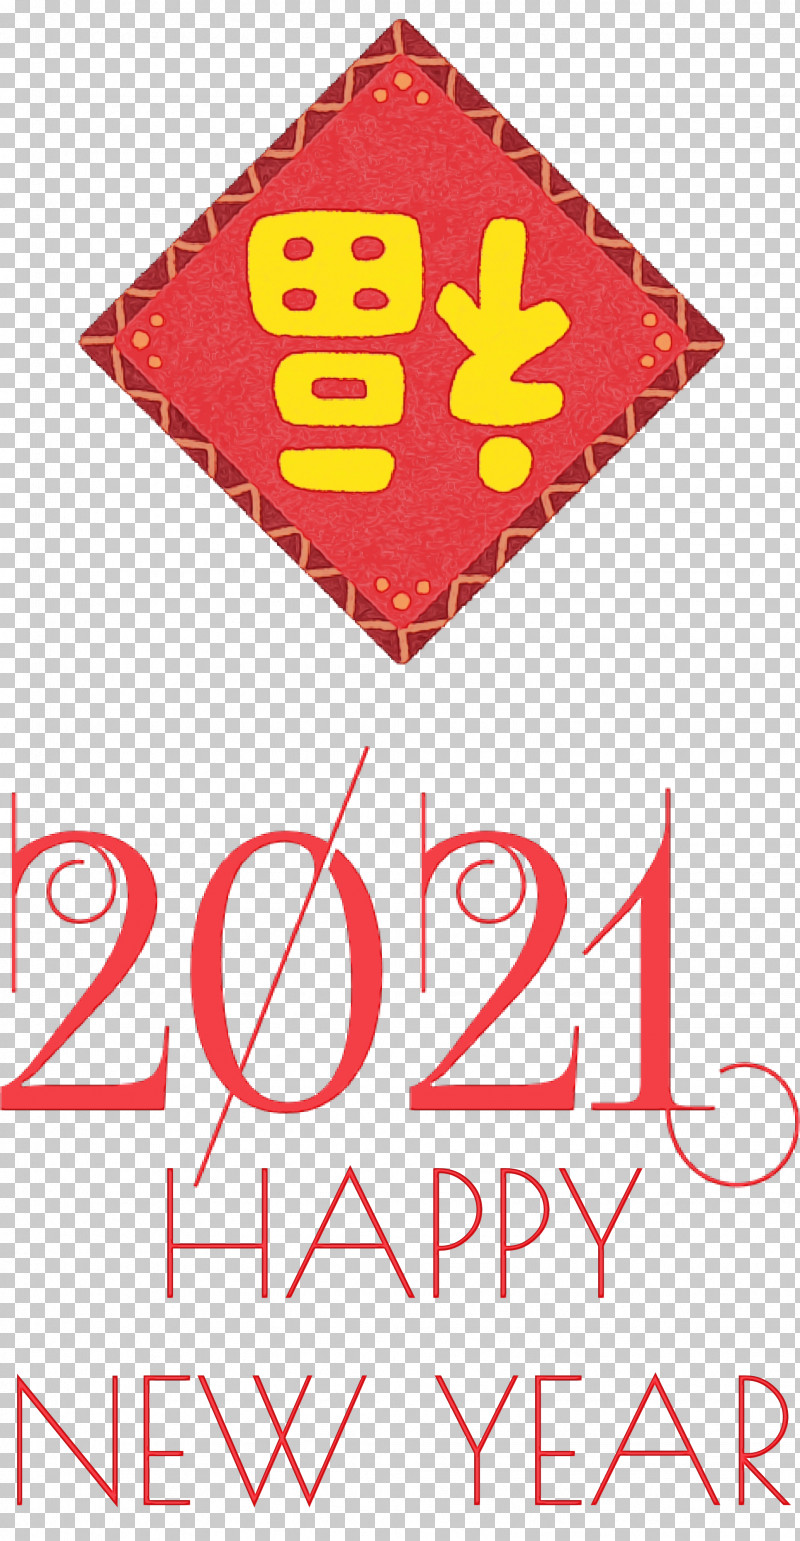 Signage Red Line Meter Geometry PNG, Clipart, 2021 Happy New Year, 2021 New Year, Geometry, Line, Mathematics Free PNG Download